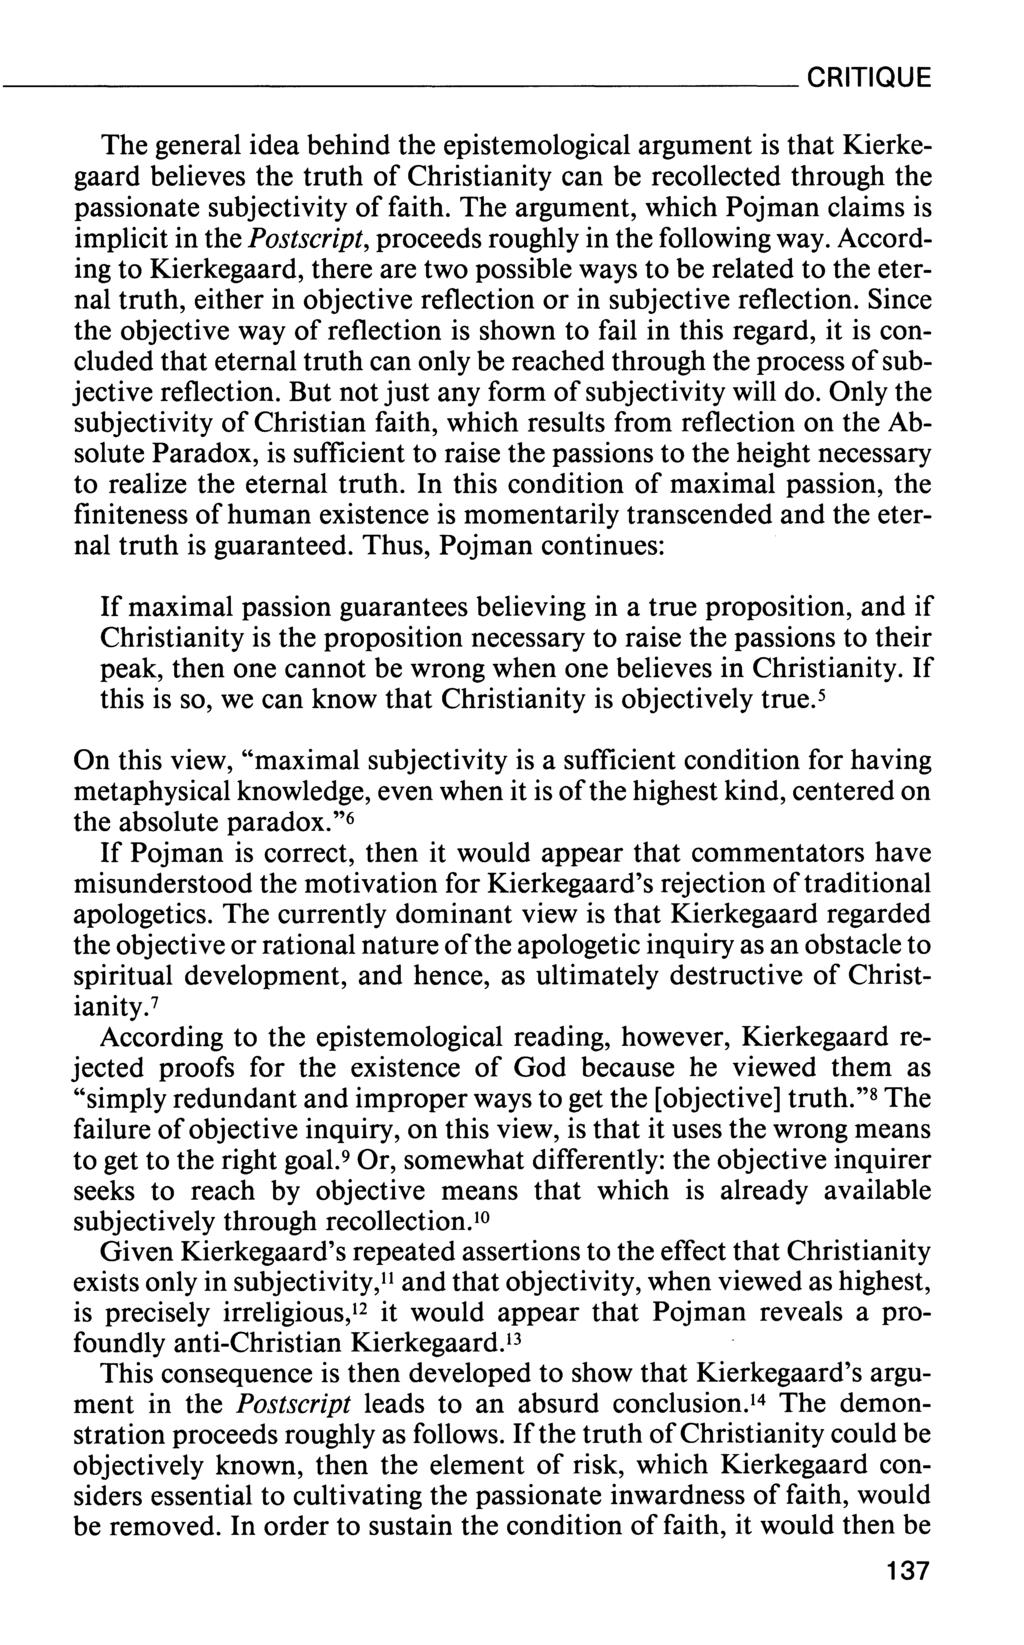 The general idea behind the epistemological argument is that Kierkegaard believes the truth of Christianity can be recollected through the passionate subjectivity of faith.